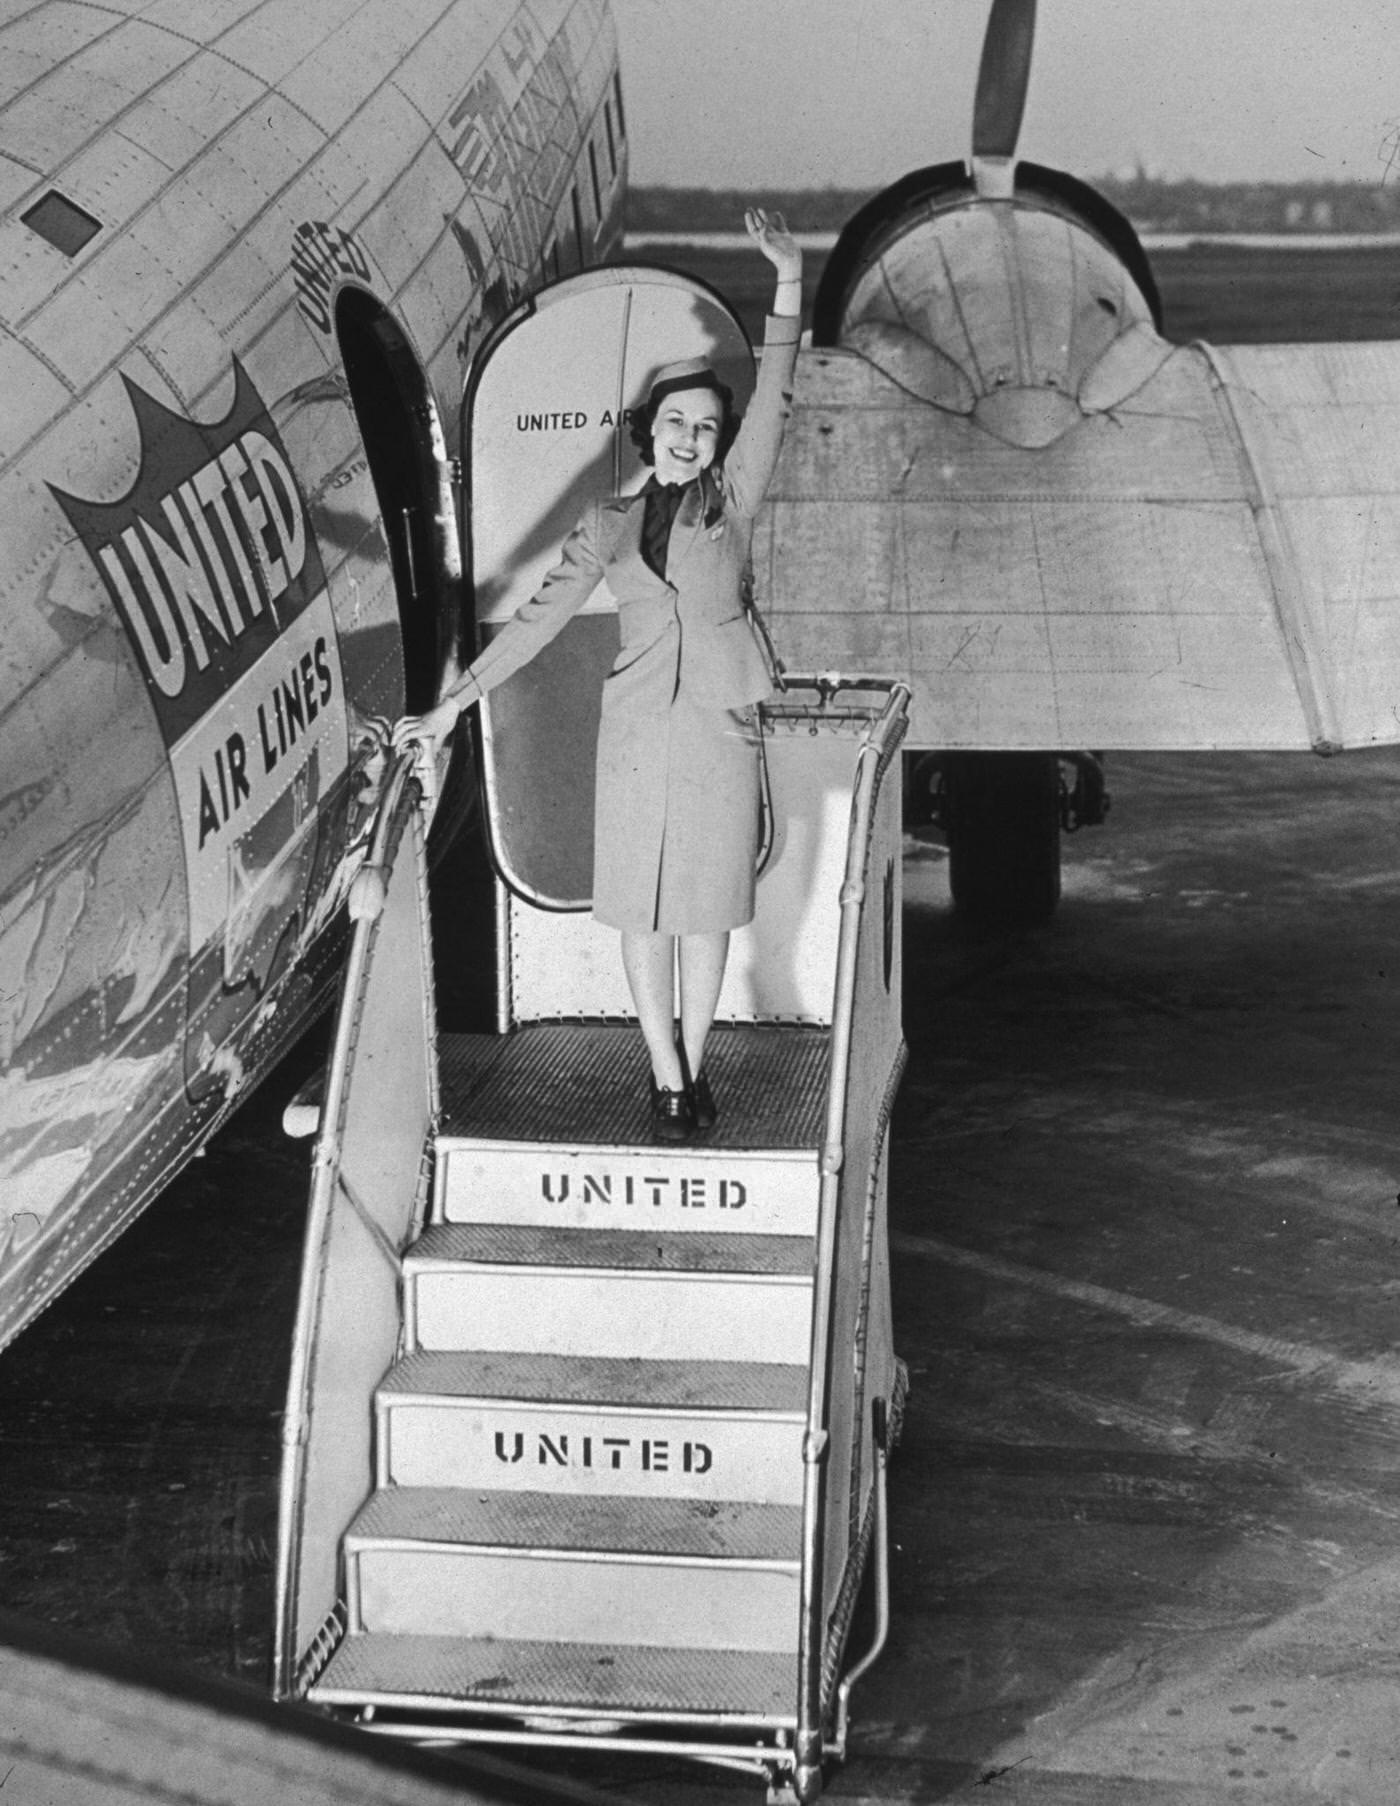 In 1945, a female flight attendant is standing on the stairway of a United Airlines airplane, waving.